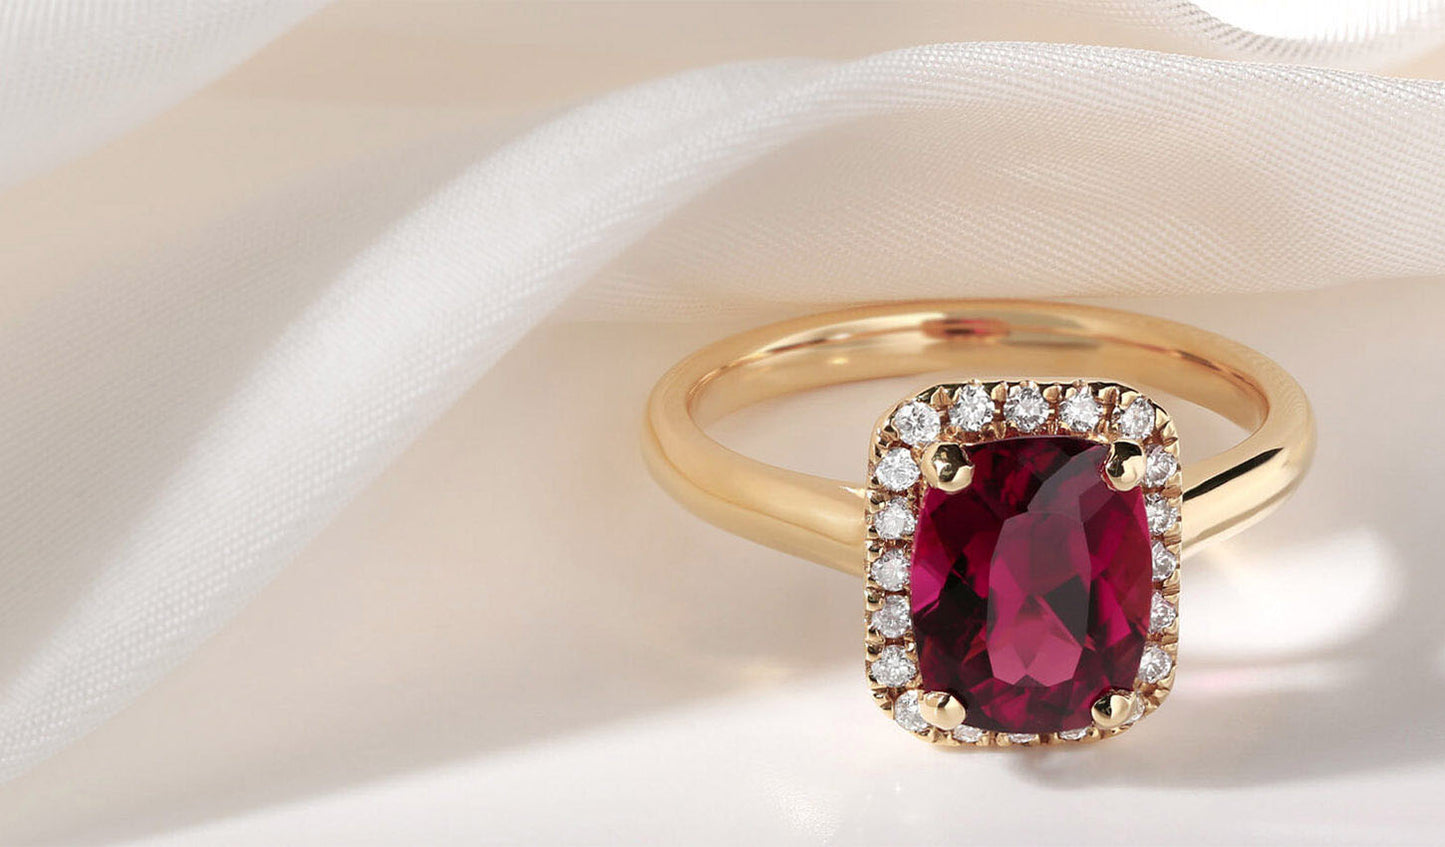 Vintage Oval Lab-Grown Ruby Ring - Teneff Jewelry